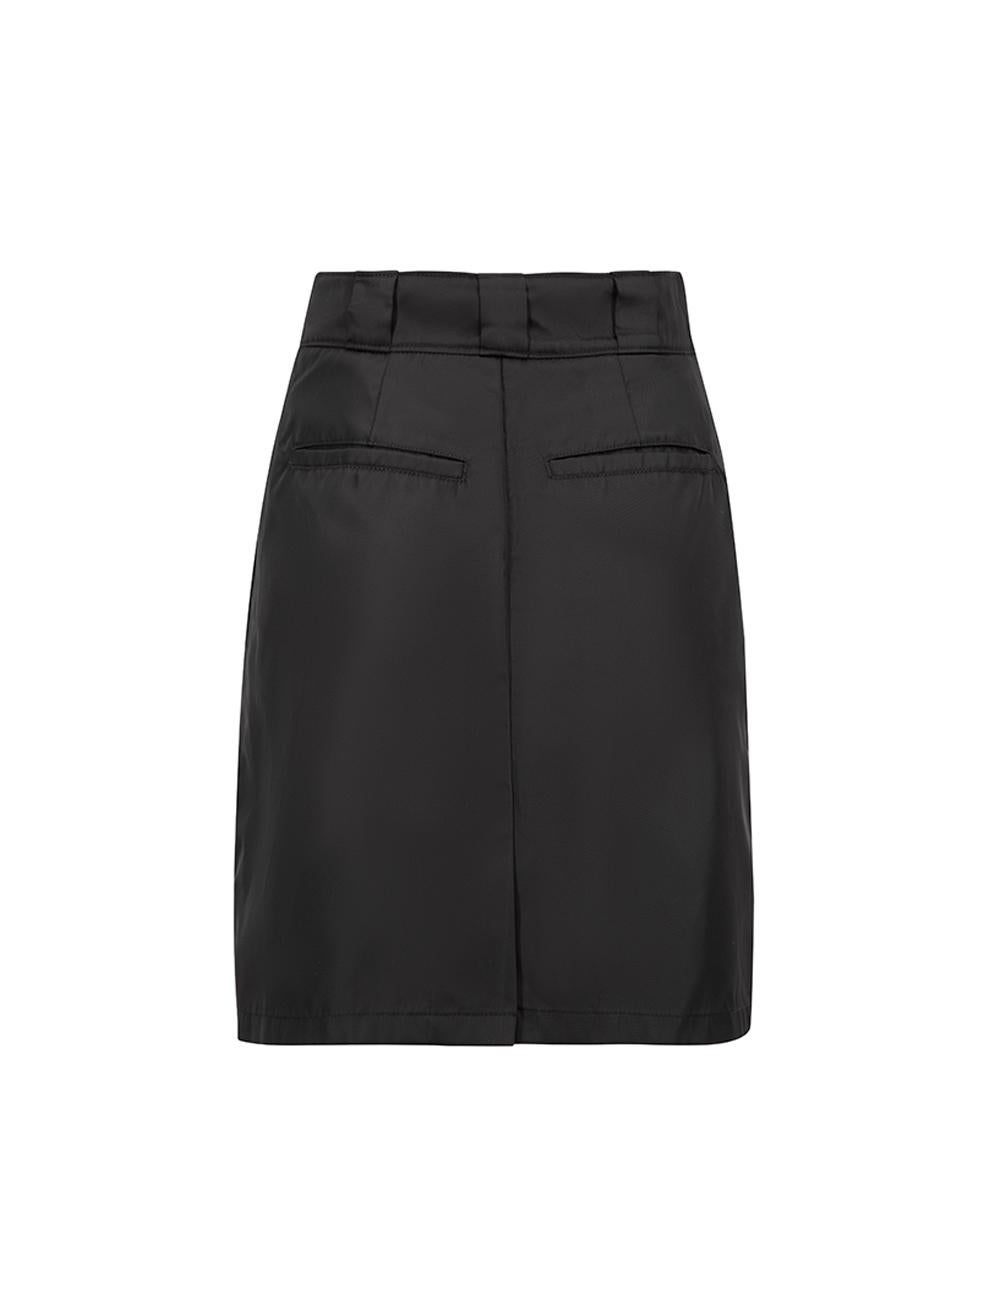 Pre-Loved Prada Women's Black High Waisted Wrap Mini Skirt In Excellent Condition In London, GB